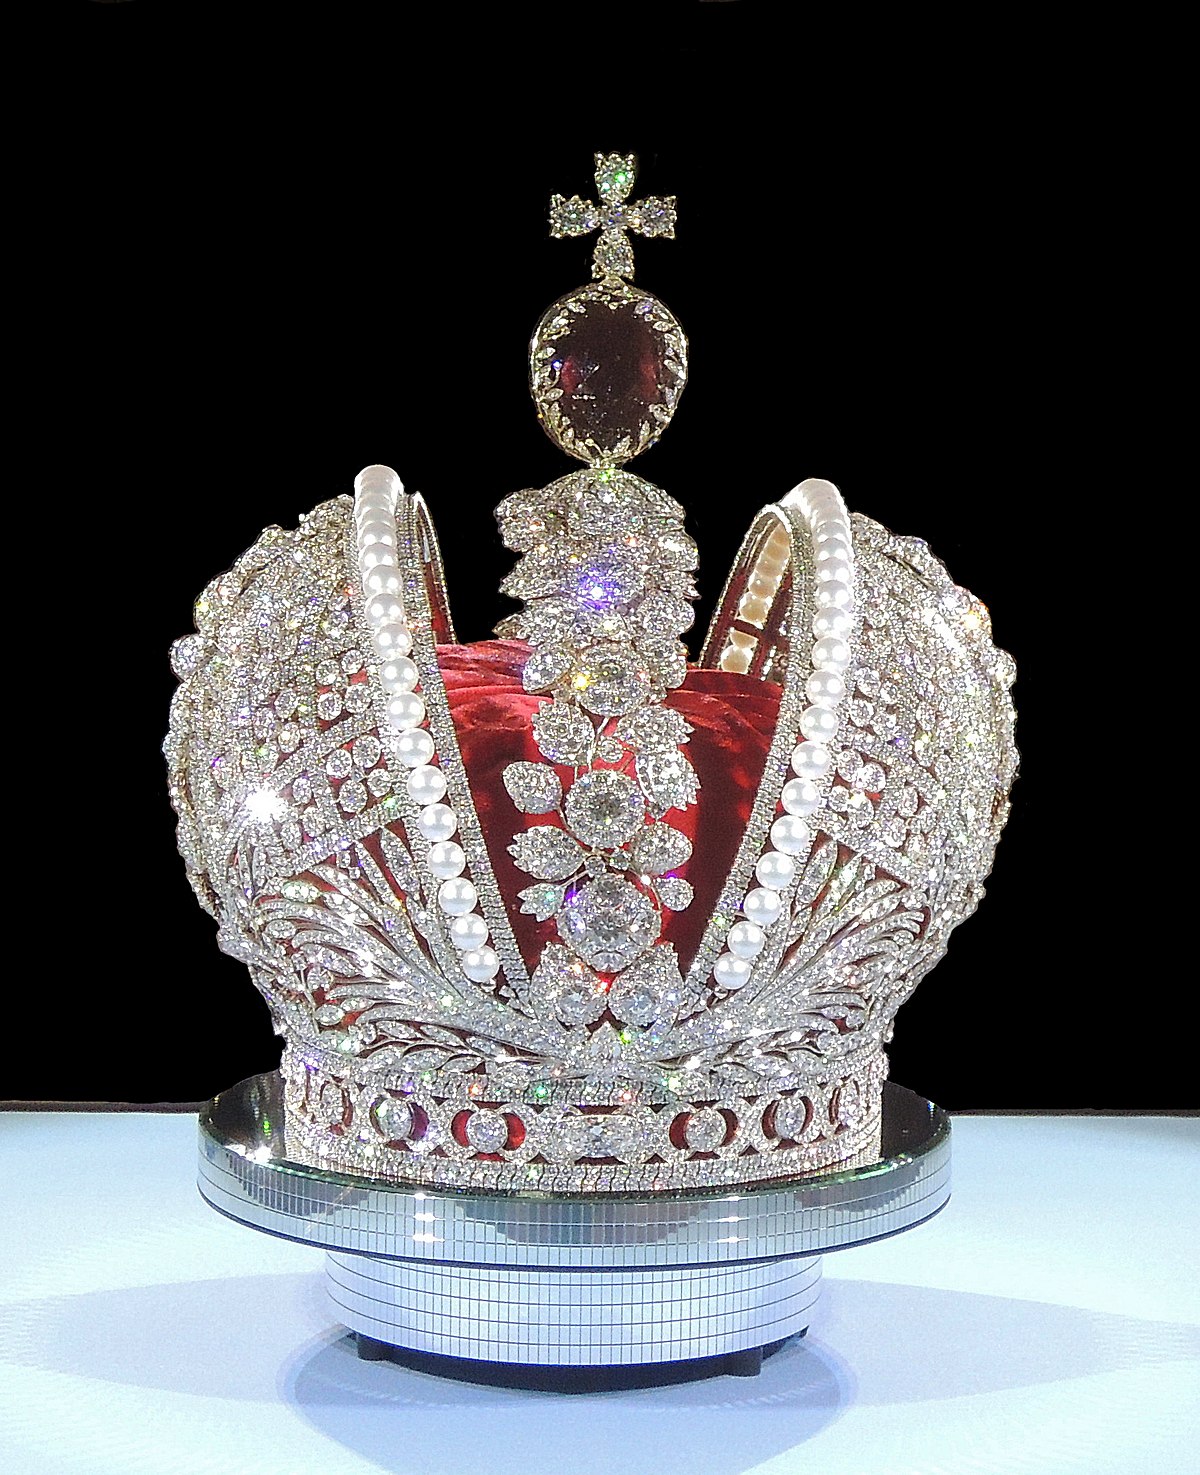 Download List of royal crowns - Wikipedia